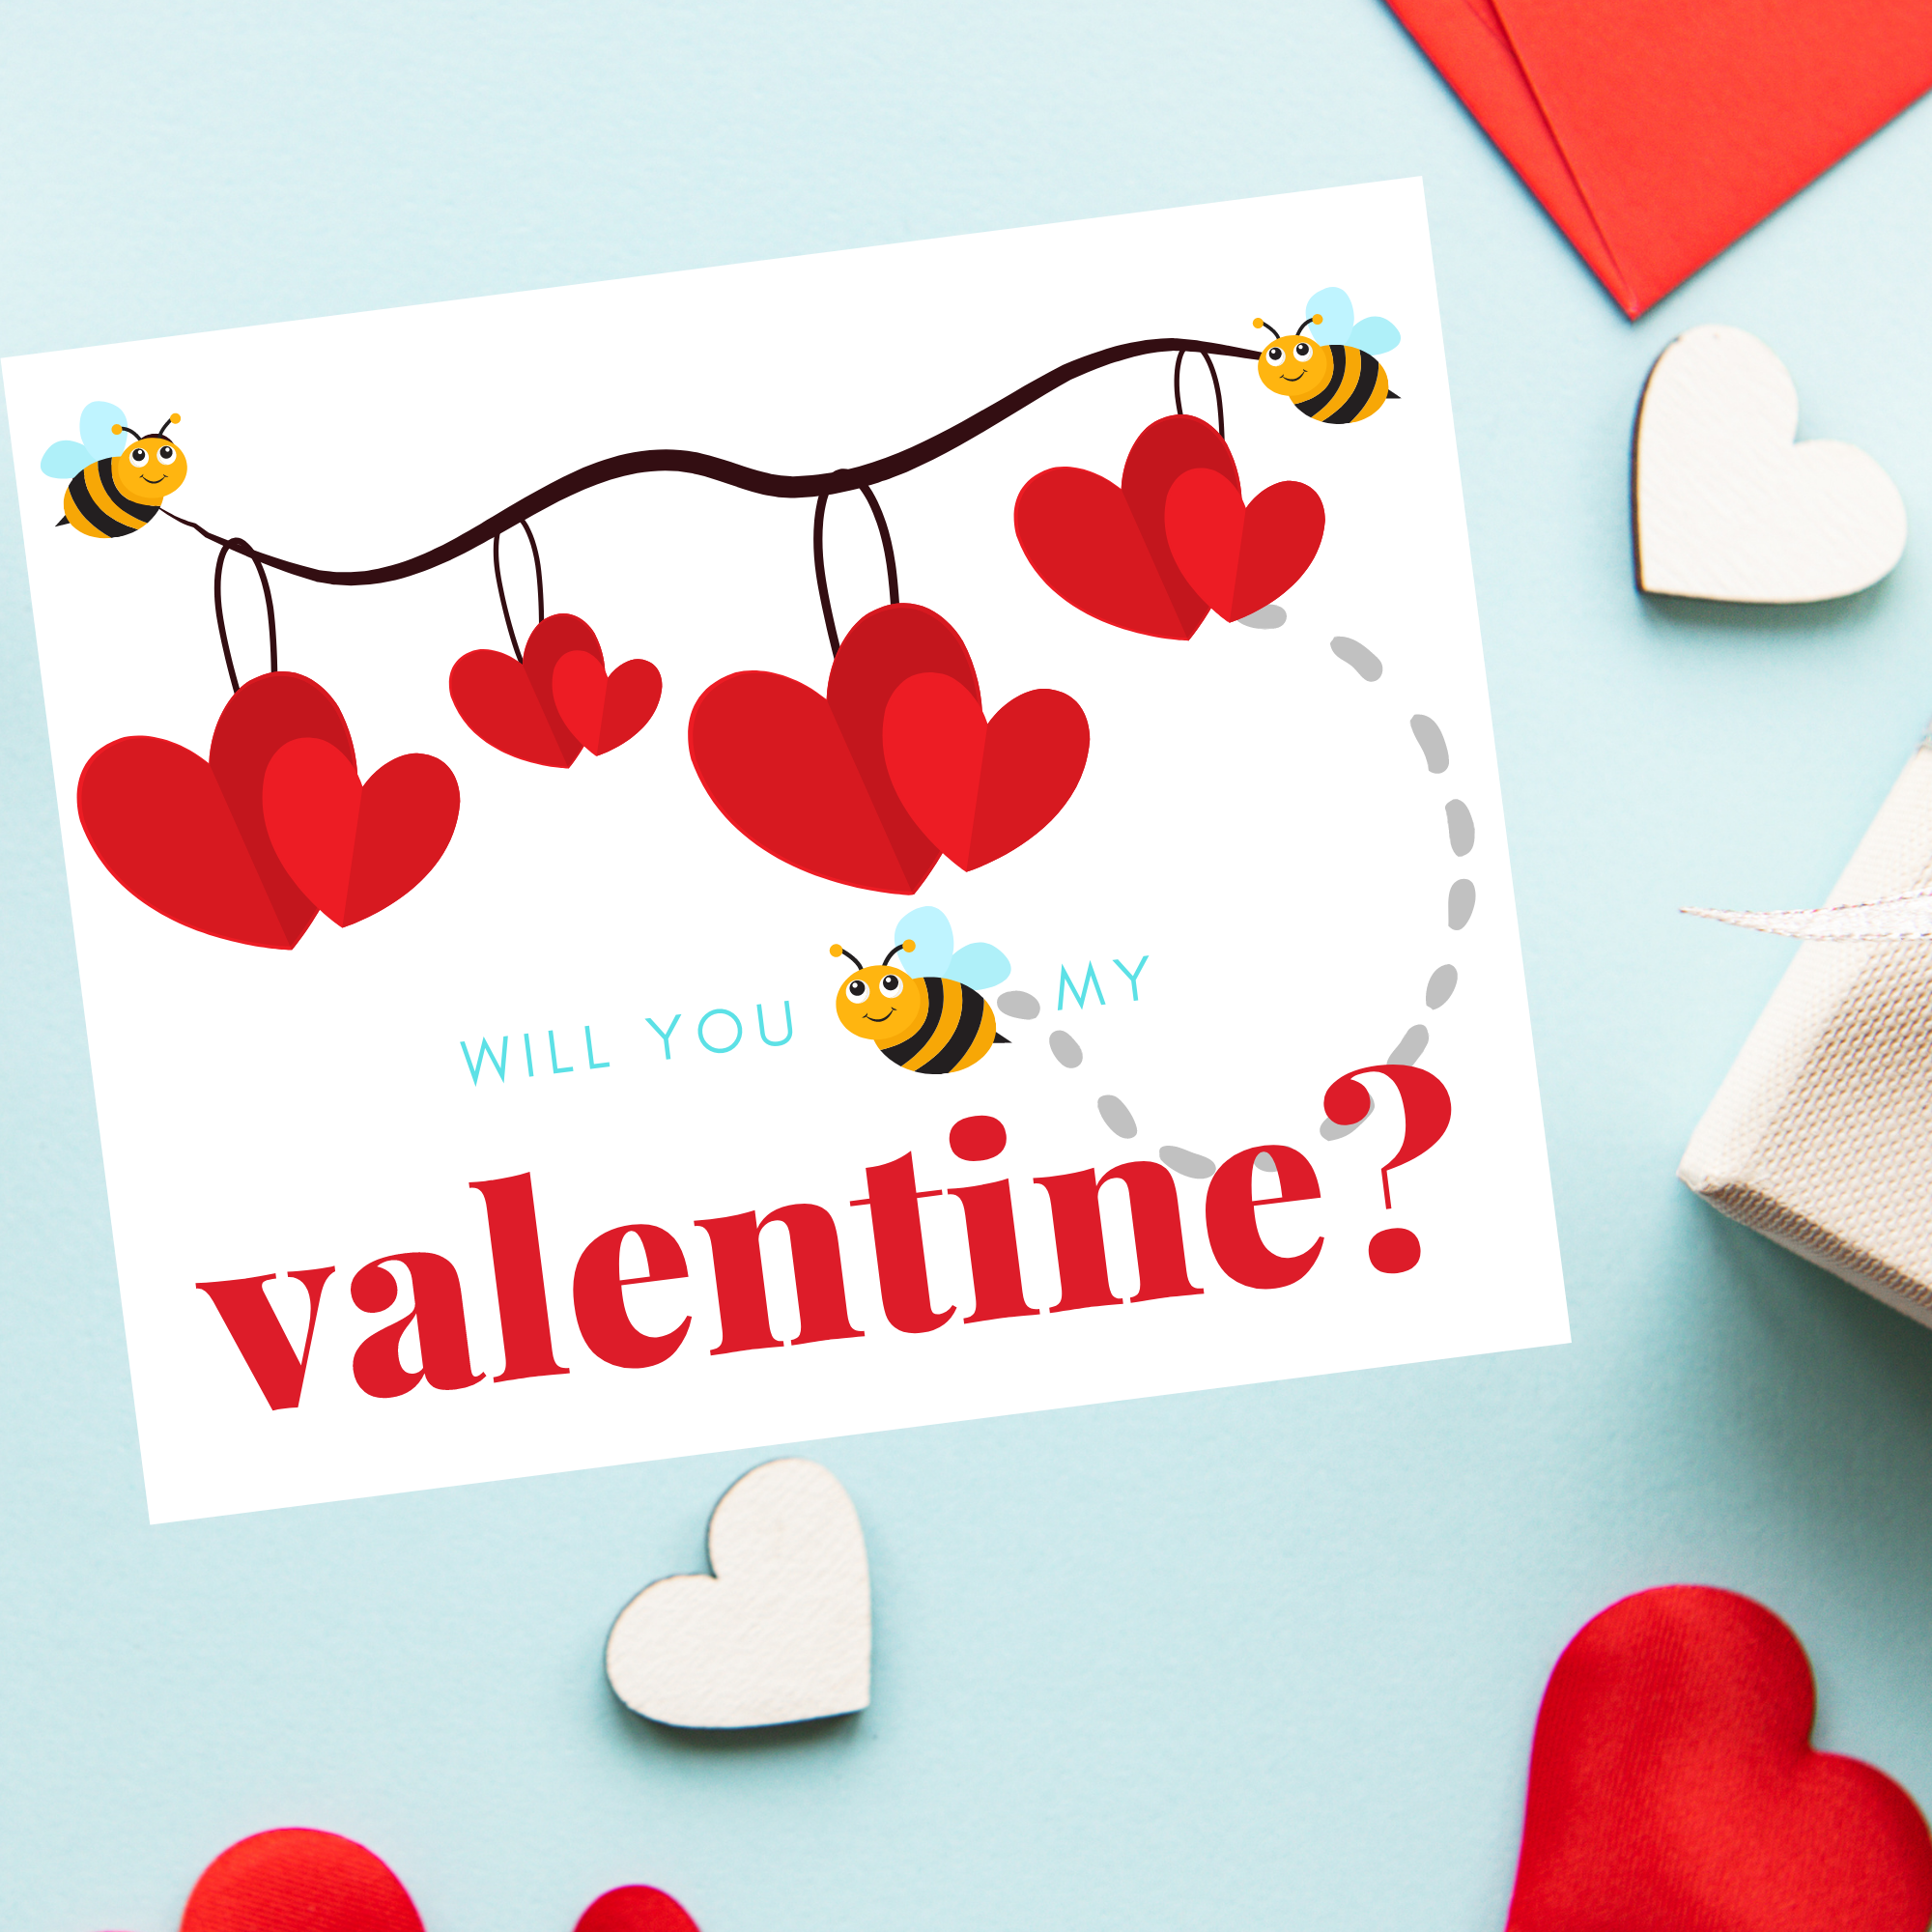 Will you "Bee" My Valentine greeting cards